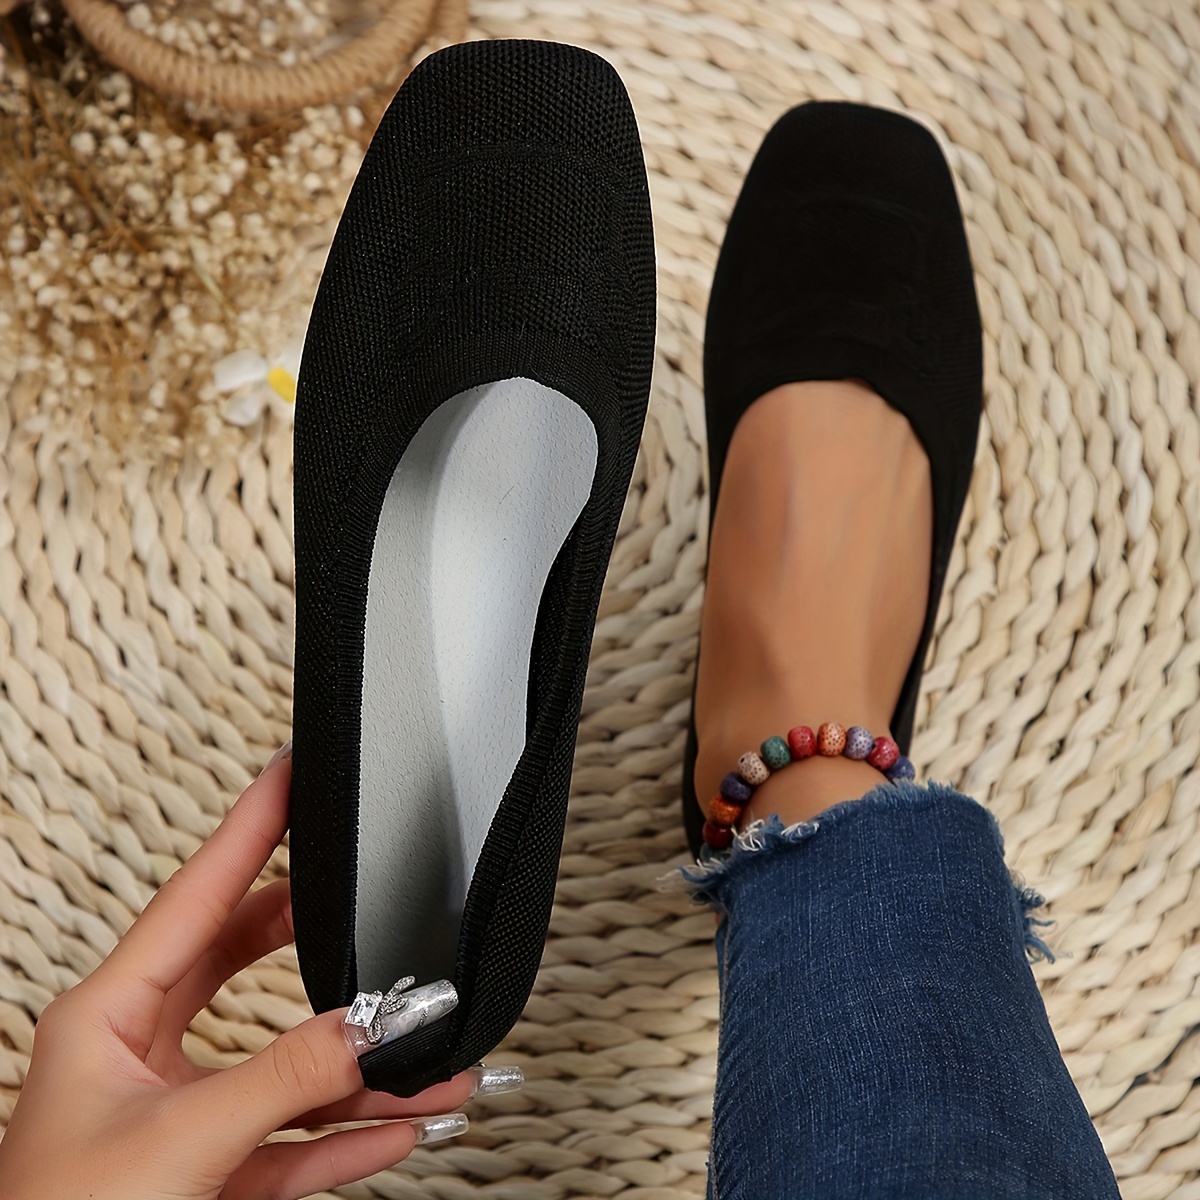 

Women's Square Toe Flat Shoes, Solid Color Soft Sole Slip On Shoes, Casual Breathable Ballet Flats